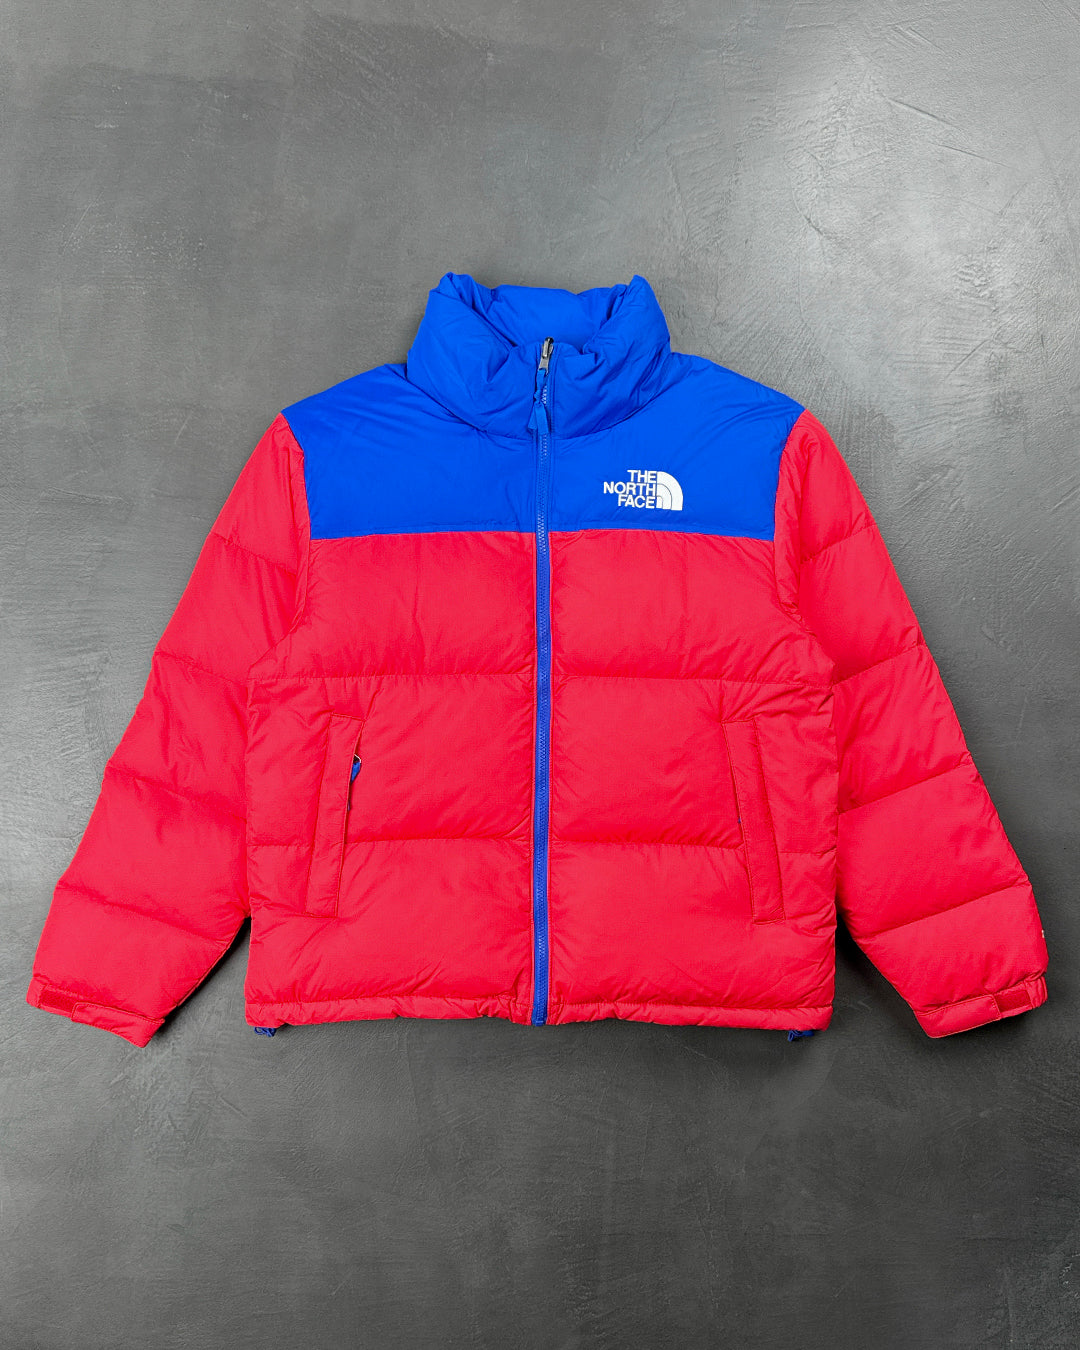 The North Face 1996 Nuptse Jacket Red/Blue